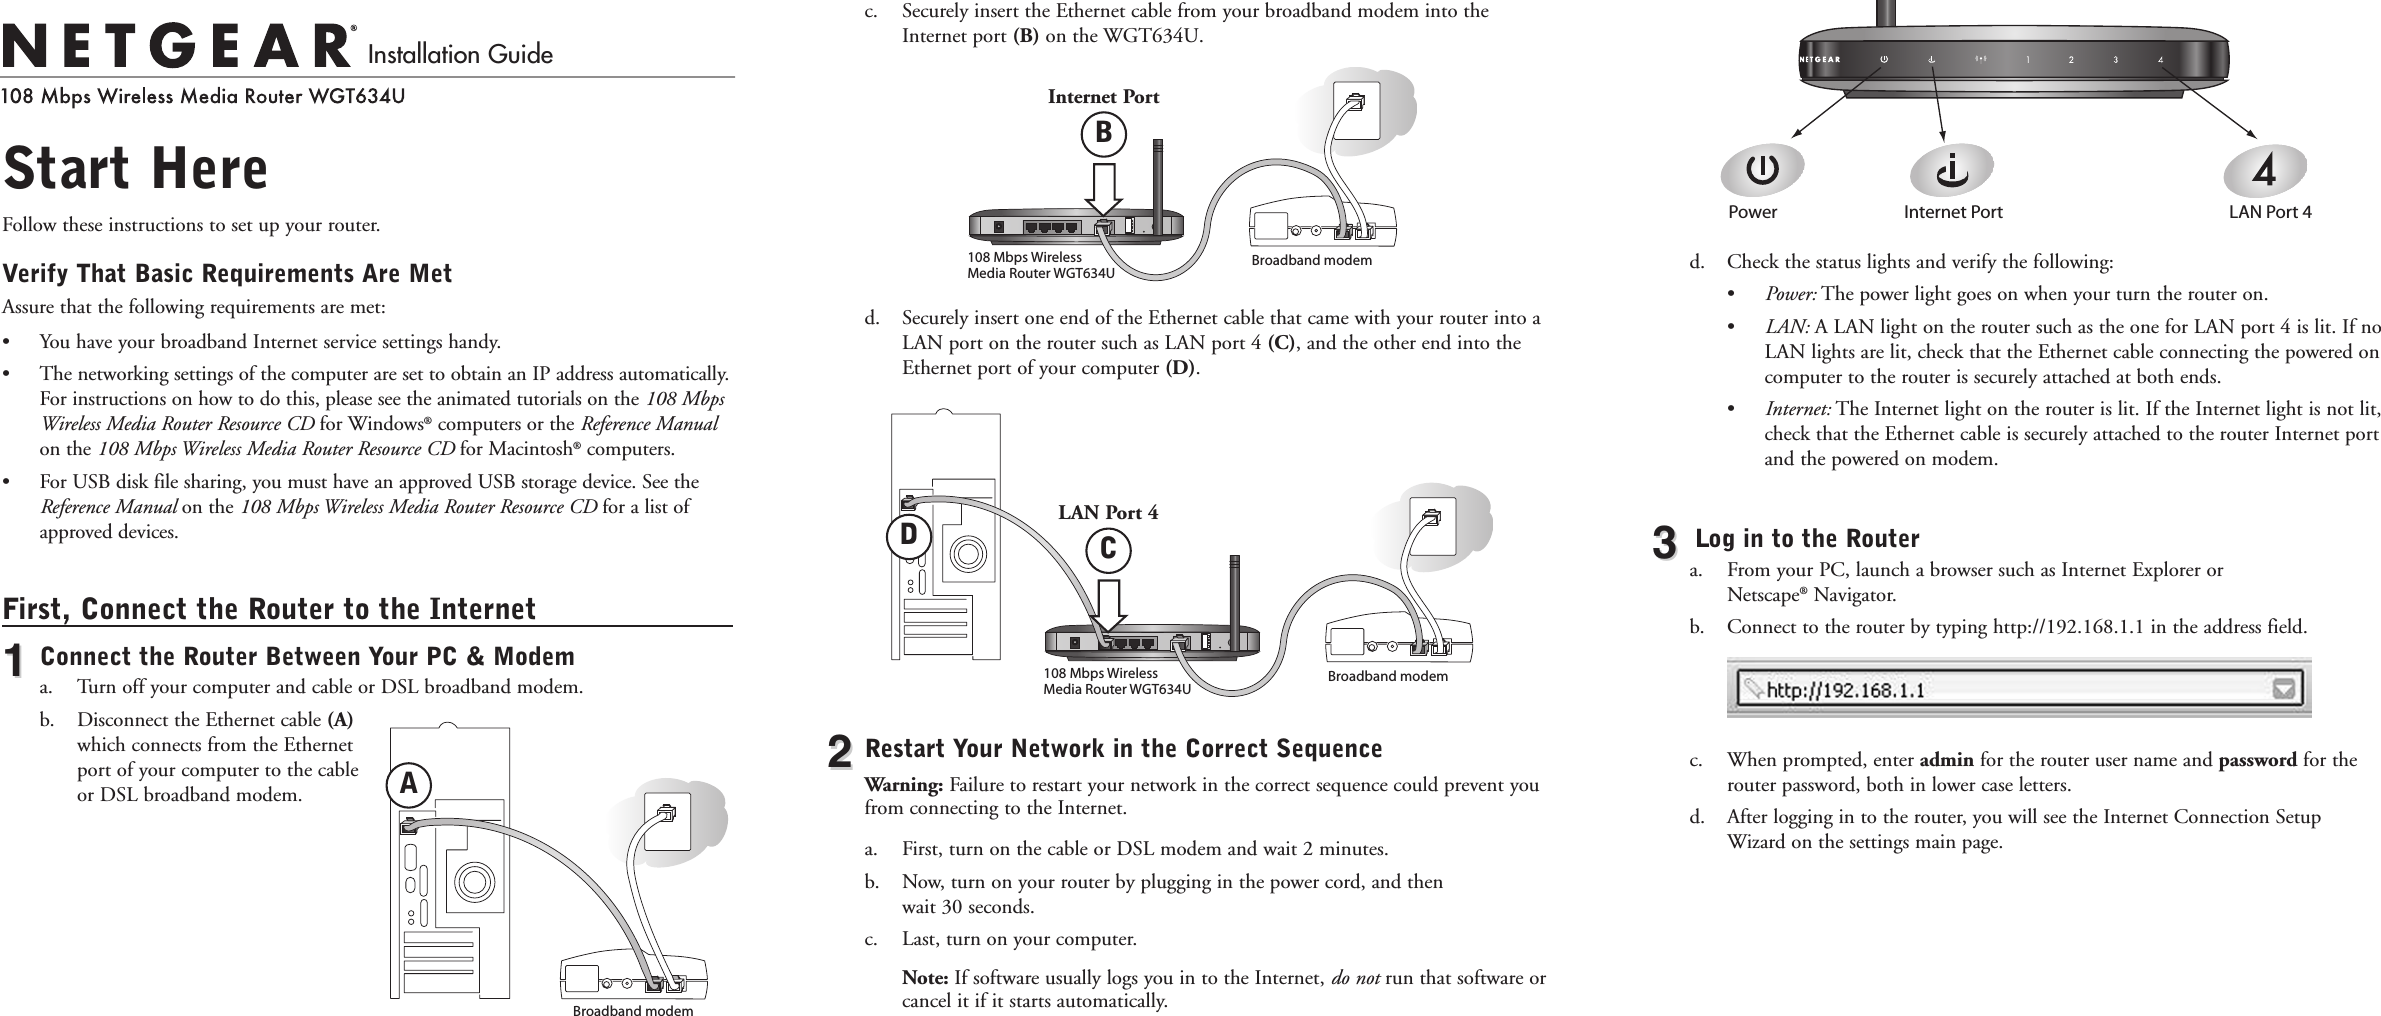 Start HereFollow these instructions to set up your router.Verify That Basic Requirements Are Met Assure that the following requirements are met:• You have your broadband Internet service settings handy.• The networking settings of the computer are set to obtain an IP address automatically.For instructions on how to do this, please see the animated tutorials on the 108 MbpsWireless Media Router Resource CD for Windows®computers or the Reference Manualon the 108 Mbps Wireless Media Router Resource CD for Macintosh®computers.•  For USB disk file sharing, you must have an approved USB storage device. See theReference Manual on the 108 Mbps Wireless Media Router Resource CD for a list ofapproved devices. First, Connect the Router to the Internet11Connect the Router Between Your PC &amp; Modema. Turn off your computer and cable or DSL broadband modem.b. Disconnect the Ethernet cable (A)which connects from the Ethernetport of your computer to the cableor DSL broadband modem.c. Securely insert the Ethernet cable from your broadband modem into theInternet port (B) on the WGT634U.d. Securely insert one end of the Ethernet cable that came with your router into aLAN port on the router such as LAN port 4 (C), and the other end into theEthernet port of your computer (D).22Restart Your Network in the Correct SequenceWarning: Failure to restart your network in the correct sequence could prevent youfrom connecting to the Internet.a. First, turn on the cable or DSL modem and wait 2 minutes.b. Now, turn on your router by plugging in the power cord, and then wait 30 seconds. c. Last, turn on your computer. Note: If software usually logs you in to the Internet, do not run that software orcancel it if it starts automatically. d. Check the status lights and verify the following:• Power: The power light goes on when your turn the router on. • LAN: A LAN light on the router such as the one for LAN port 4 is lit. If noLAN lights are lit, check that the Ethernet cable connecting the powered oncomputer to the router is securely attached at both ends.• Internet: The Internet light on the router is lit. If the Internet light is not lit,check that the Ethernet cable is securely attached to the router Internet portand the powered on modem. 33Log in to the Routera.  From your PC, launch a browser such as Internet Explorer or Netscape®Navigator.b.  Connect to the router by typing http://192.168.1.1 in the address field. c.  When prompted, enter admin for the router user name and password for therouter password, both in lower case letters.d. After logging in to the router, you will see the Internet Connection SetupWizard on the settings main page.Installation GuideBroadband modemBroadband modem108 Mbps Wireless  Media Router WGT634UBroadband modem108 Mbps Wireless  Media Router WGT634UPower Internet Port LAN Port 4ABInternet PortCLAN Port 4D